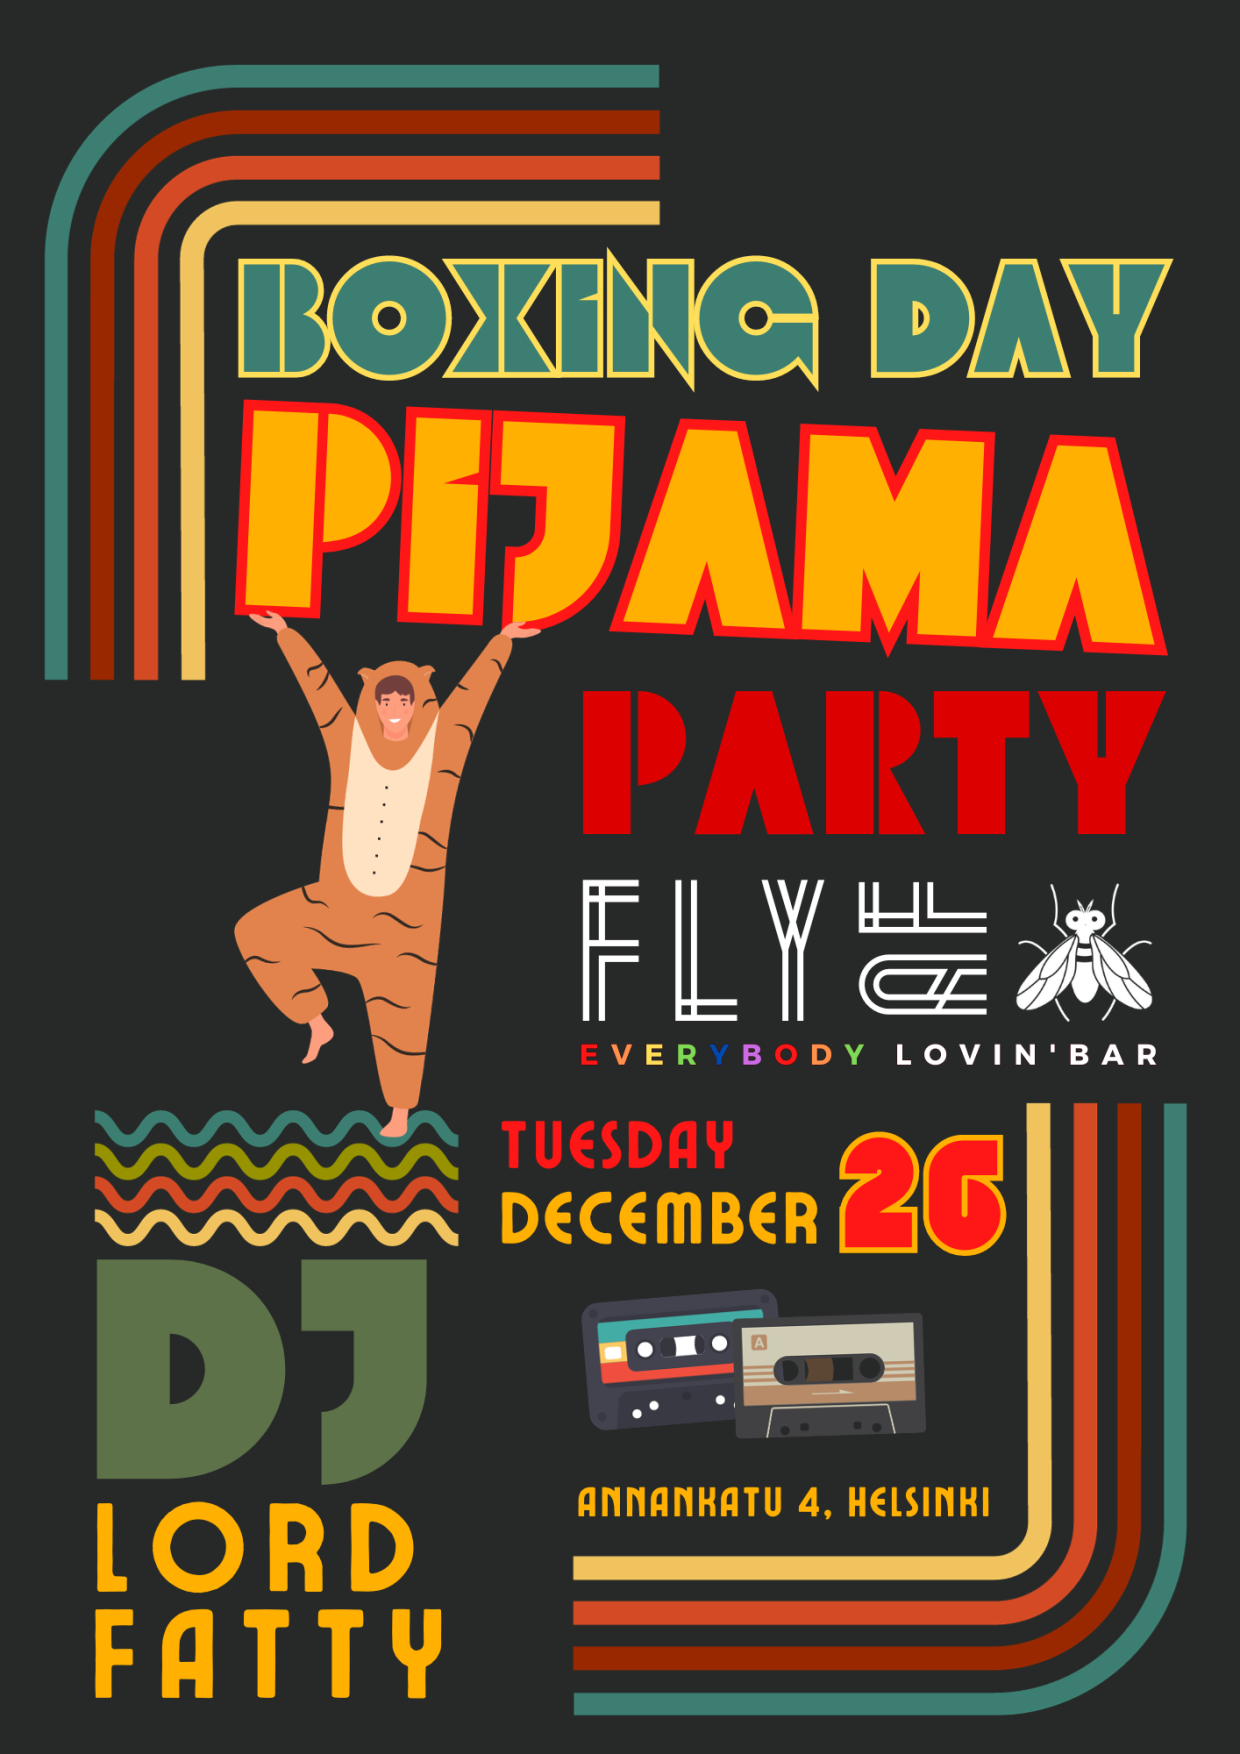 Grooviest Boxing day Pajama Party